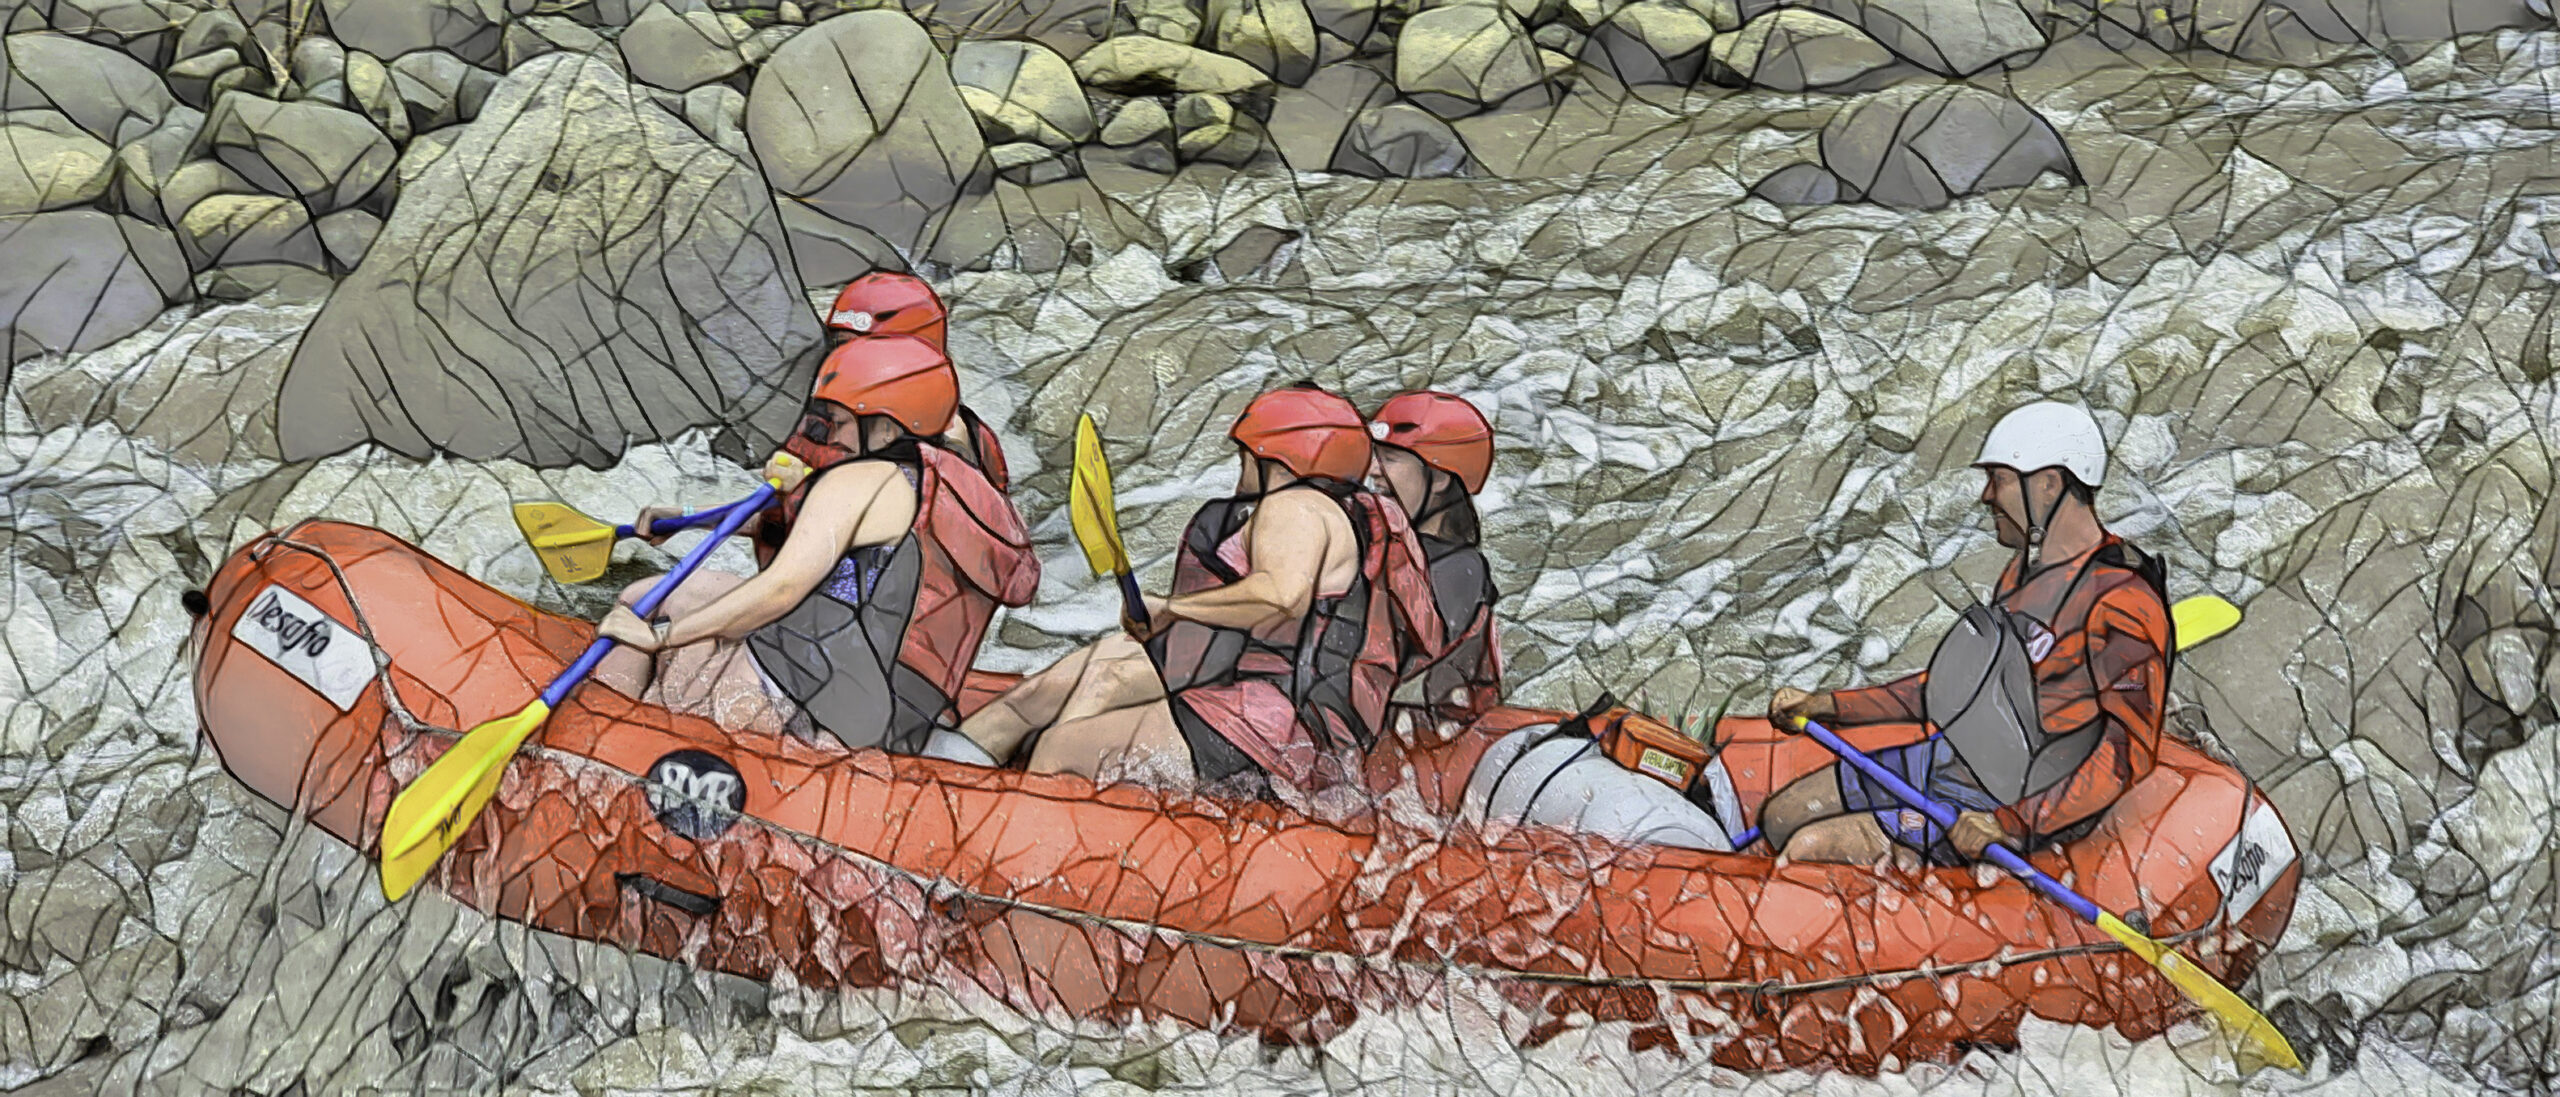 Whitw Water Rafting in Costa Rica